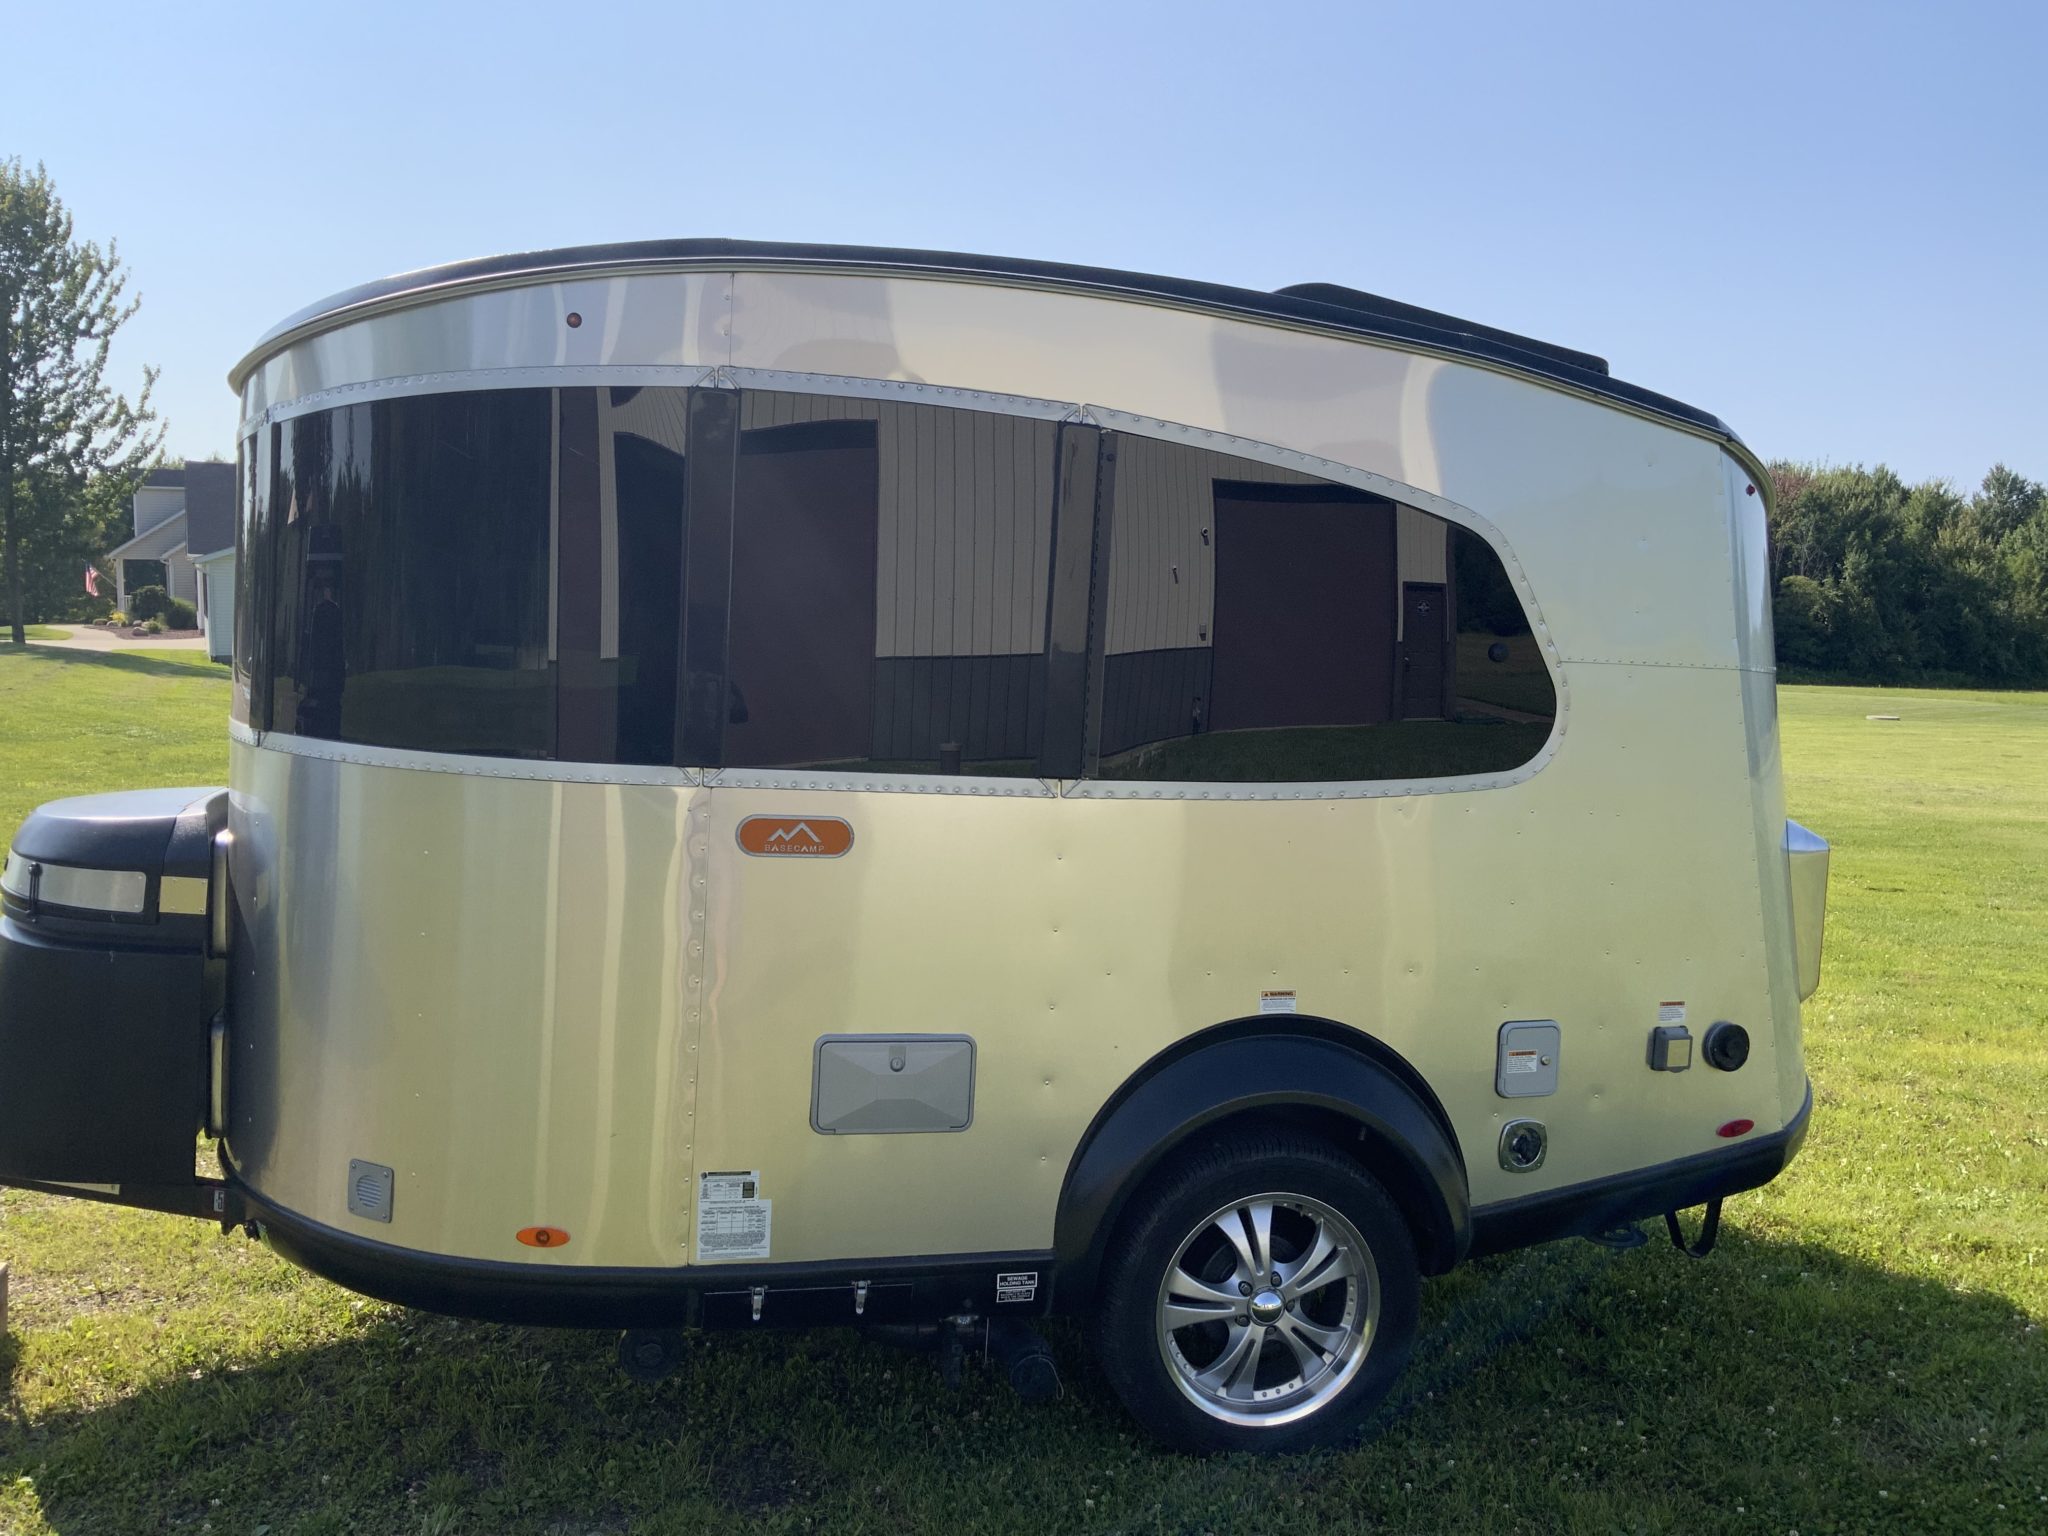 2017 Airstream 16ft Basecamp For Sale In North East Airstream Marketplace